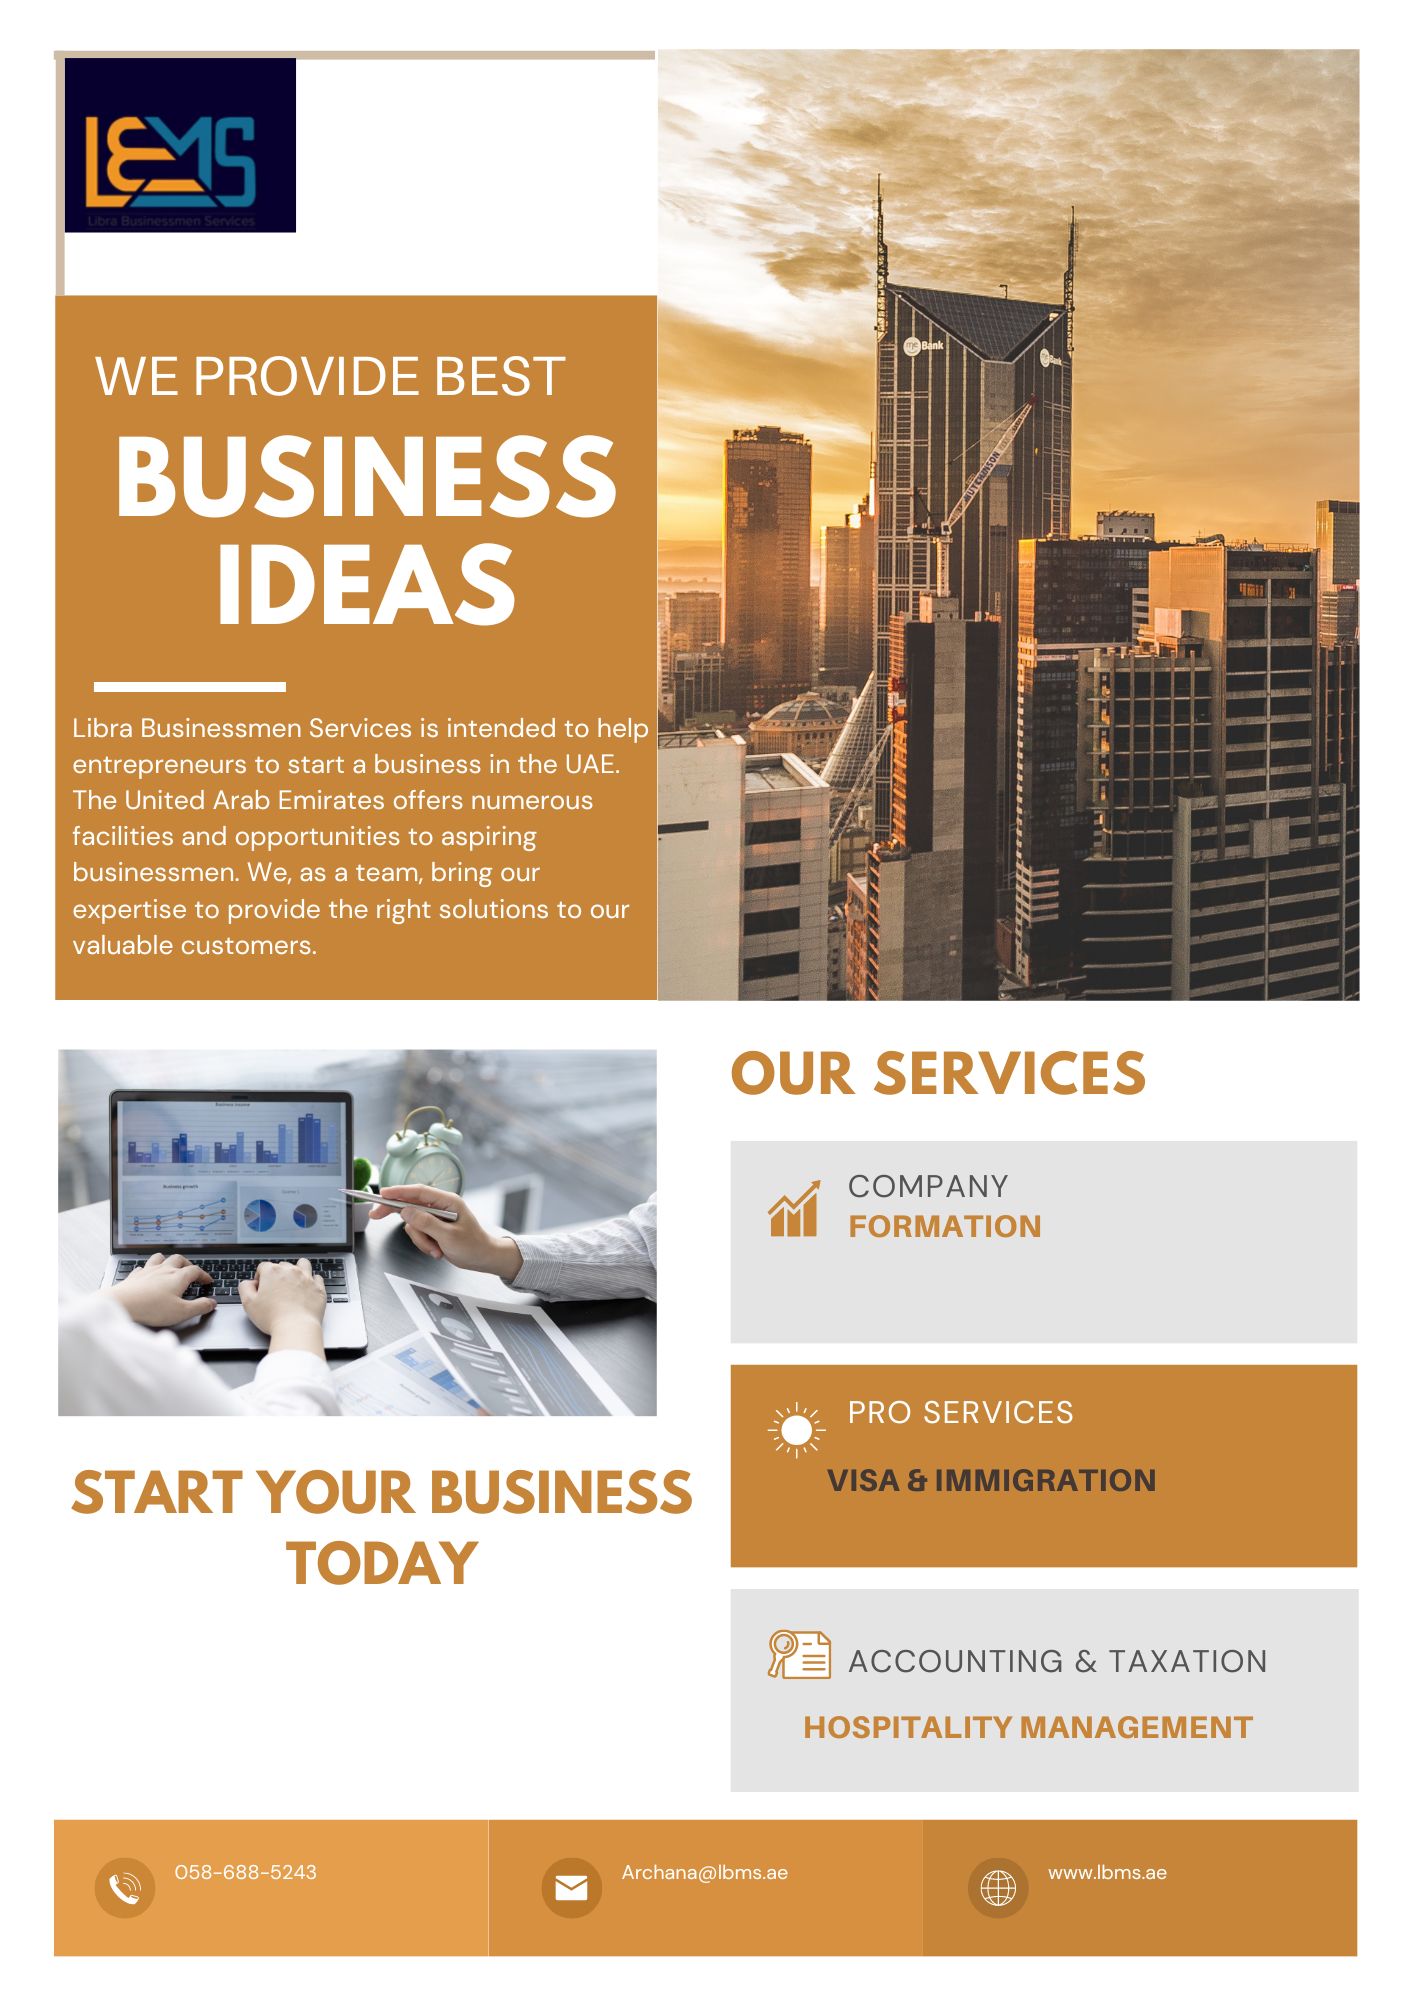 We Are The Best Solution For Your Business Setup